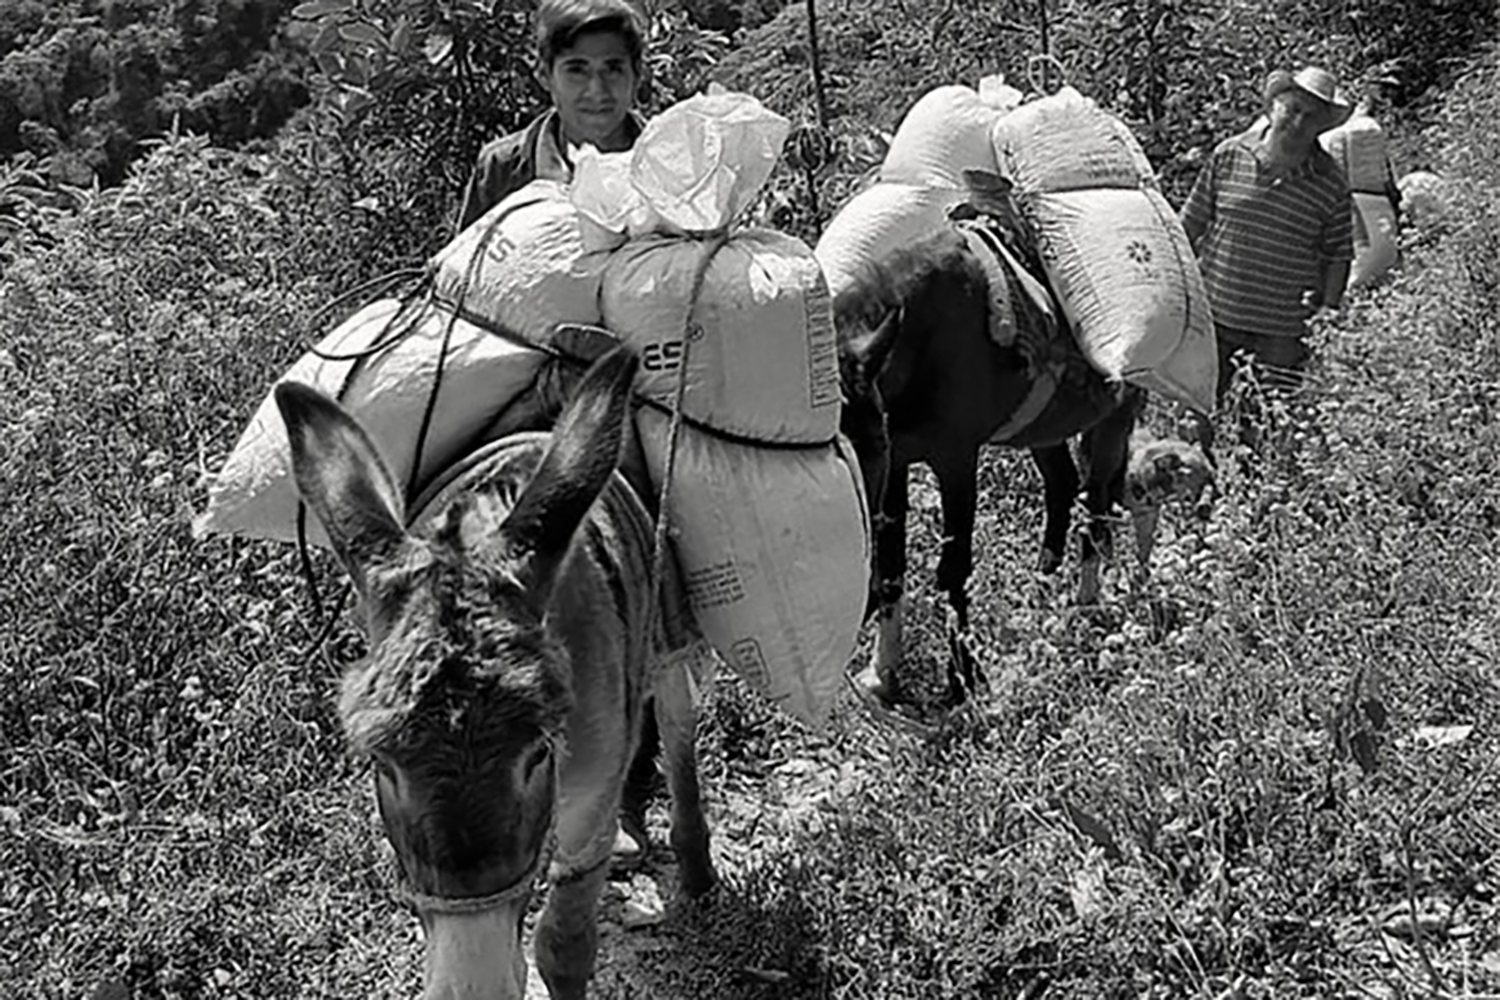 Two people and two donkeys bring sacks of coffee beans through a trail on a coffee farm.